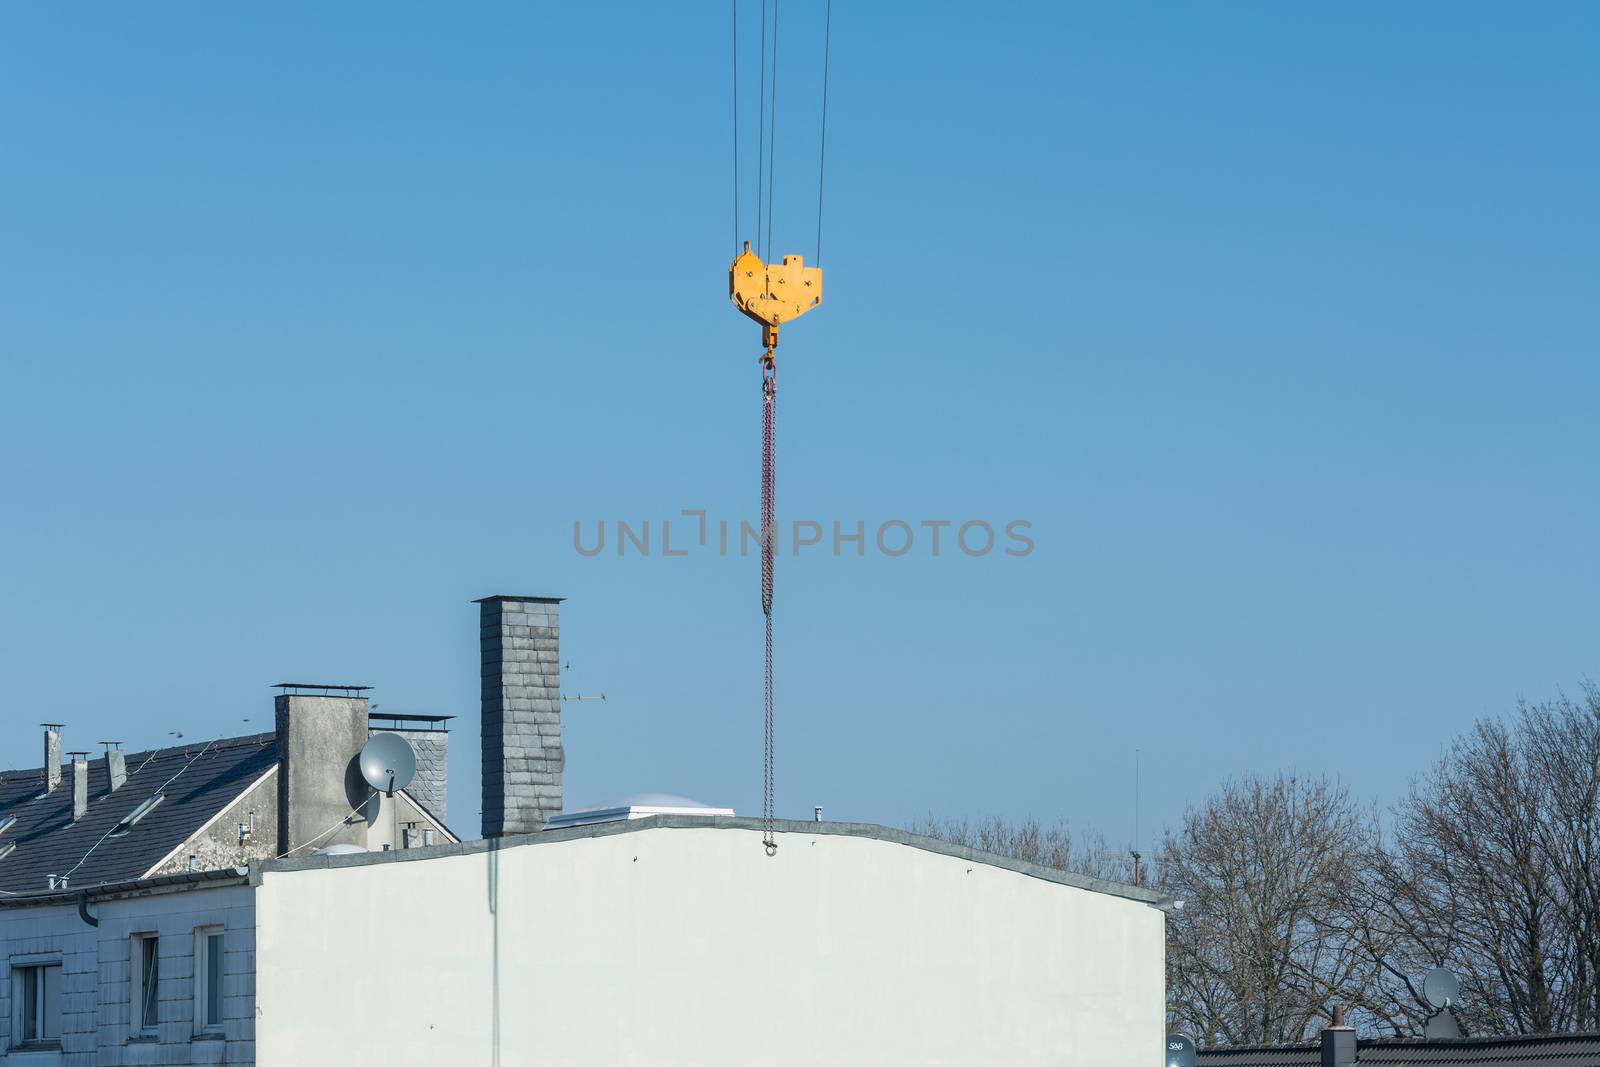 Construction crane against blue sky photographed, space for labeling.